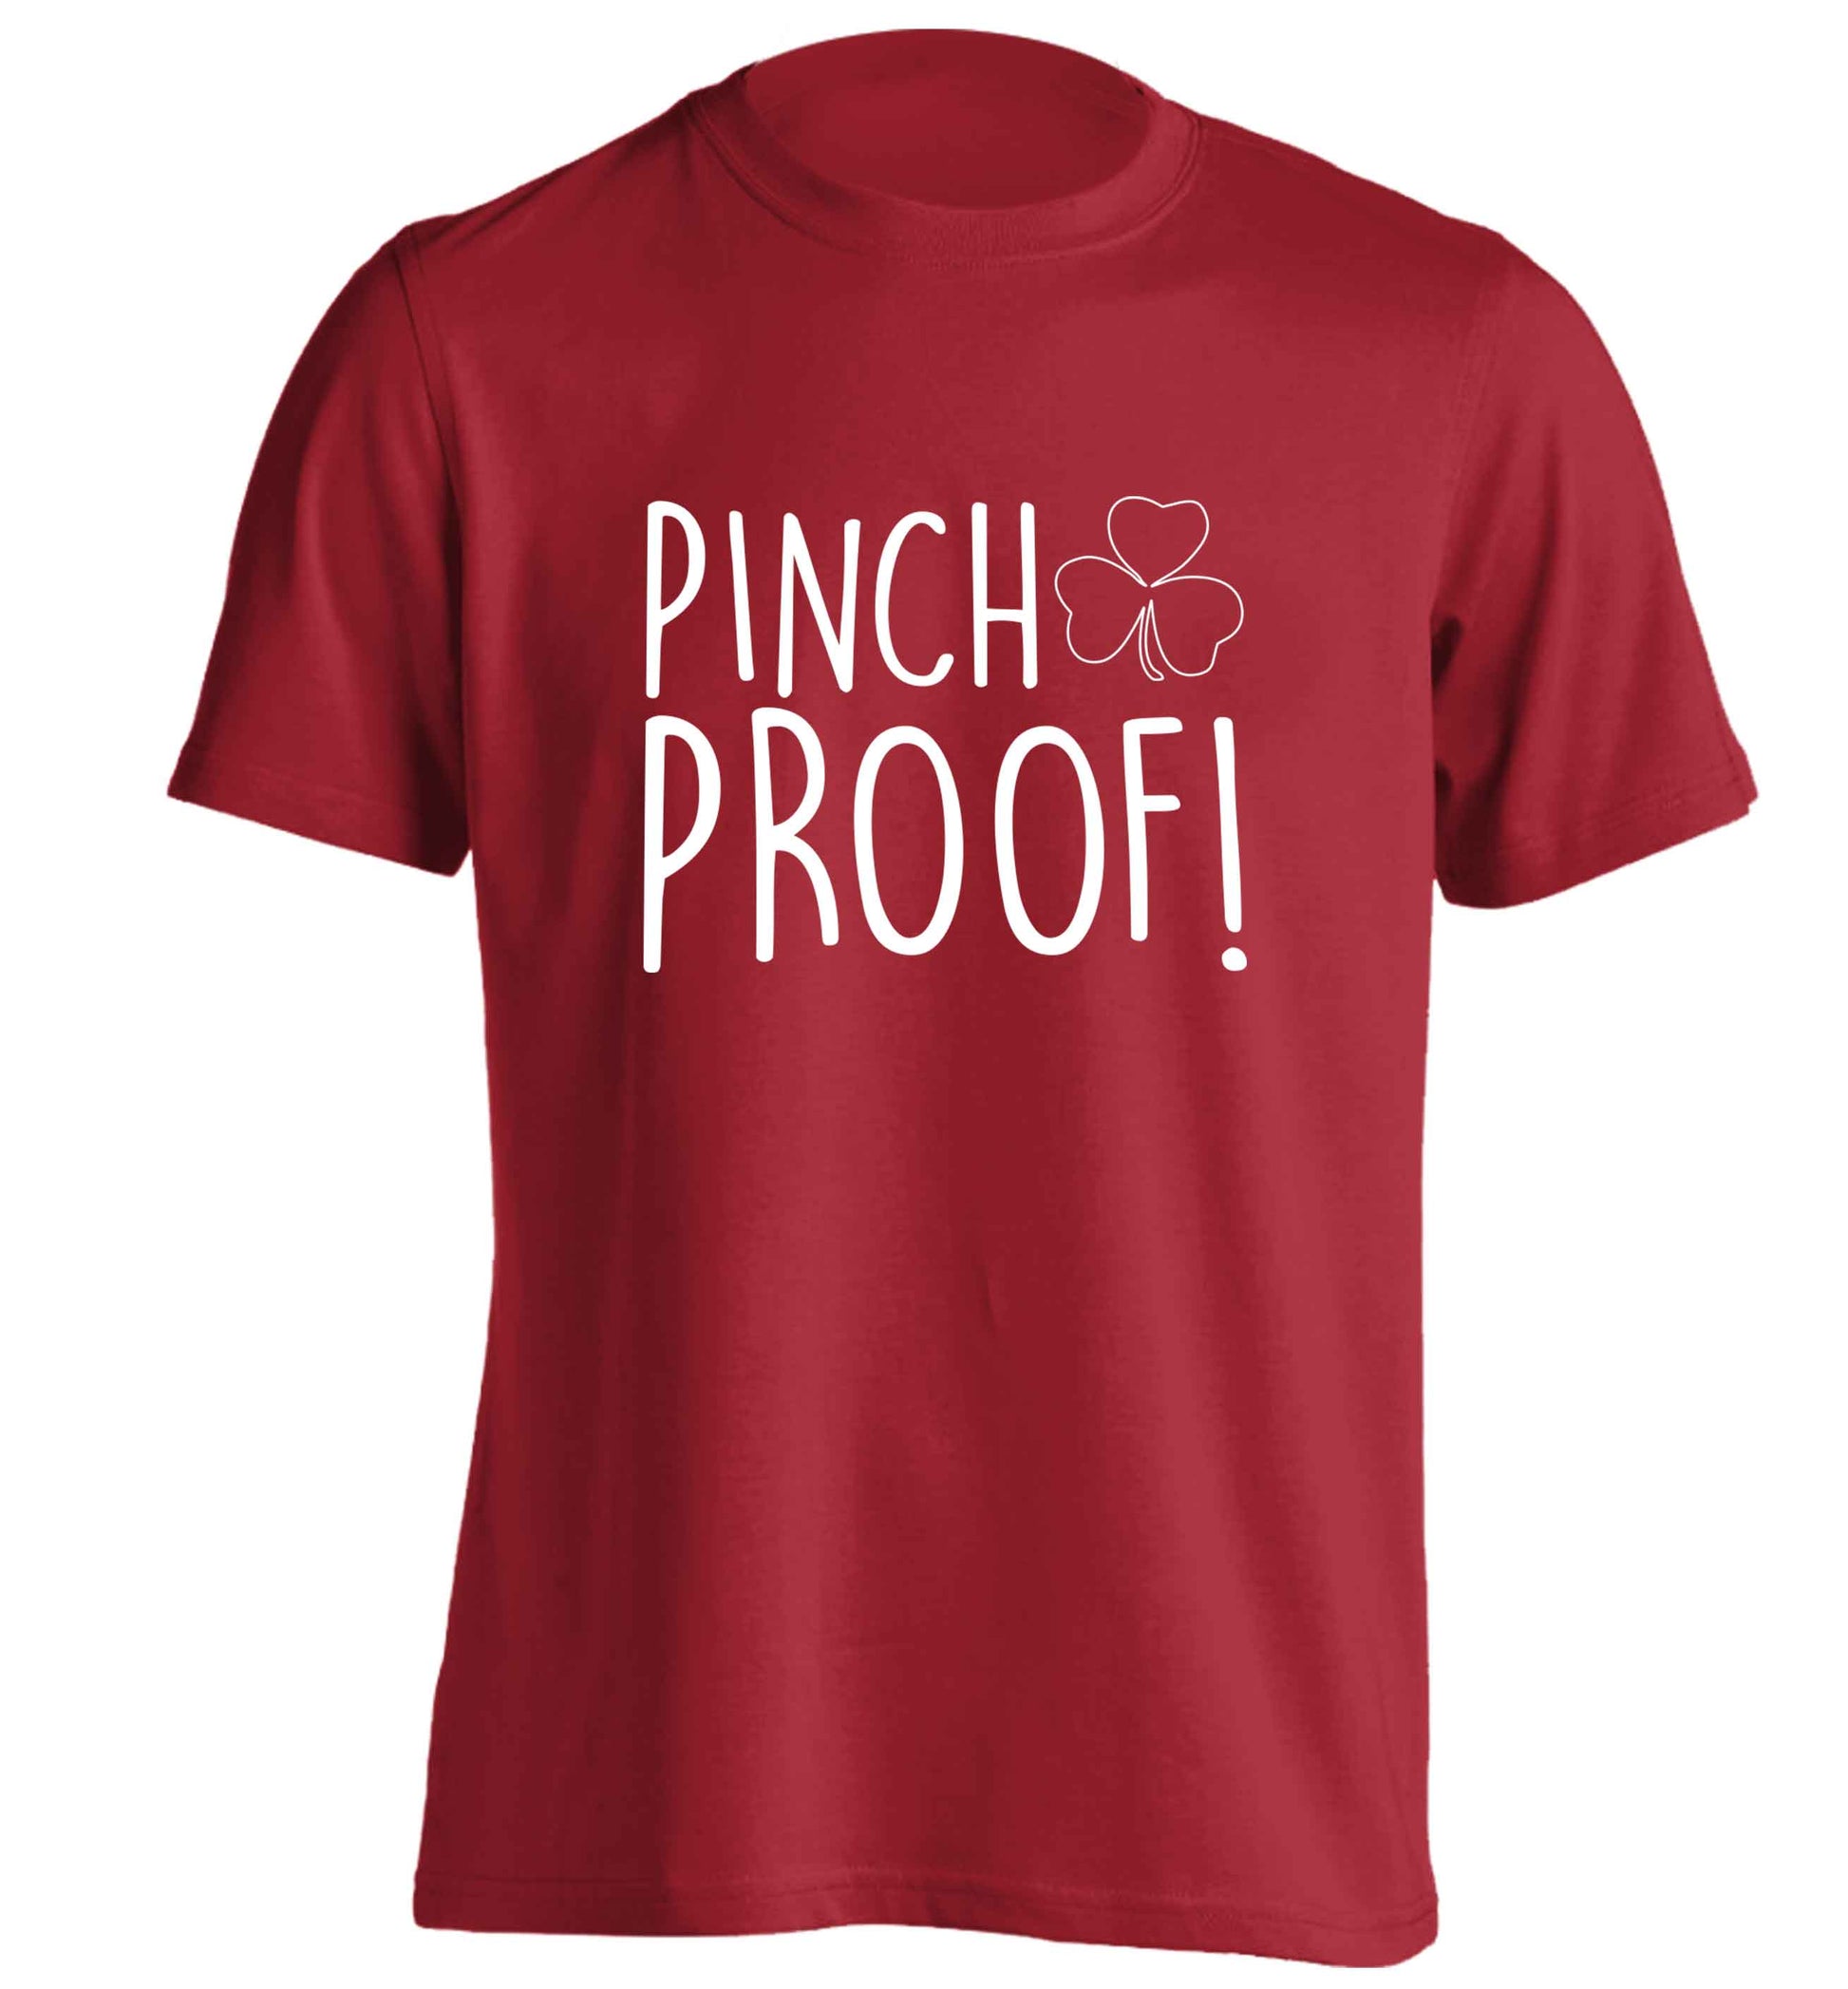 Pinch Proof adults unisex red Tshirt 2XL